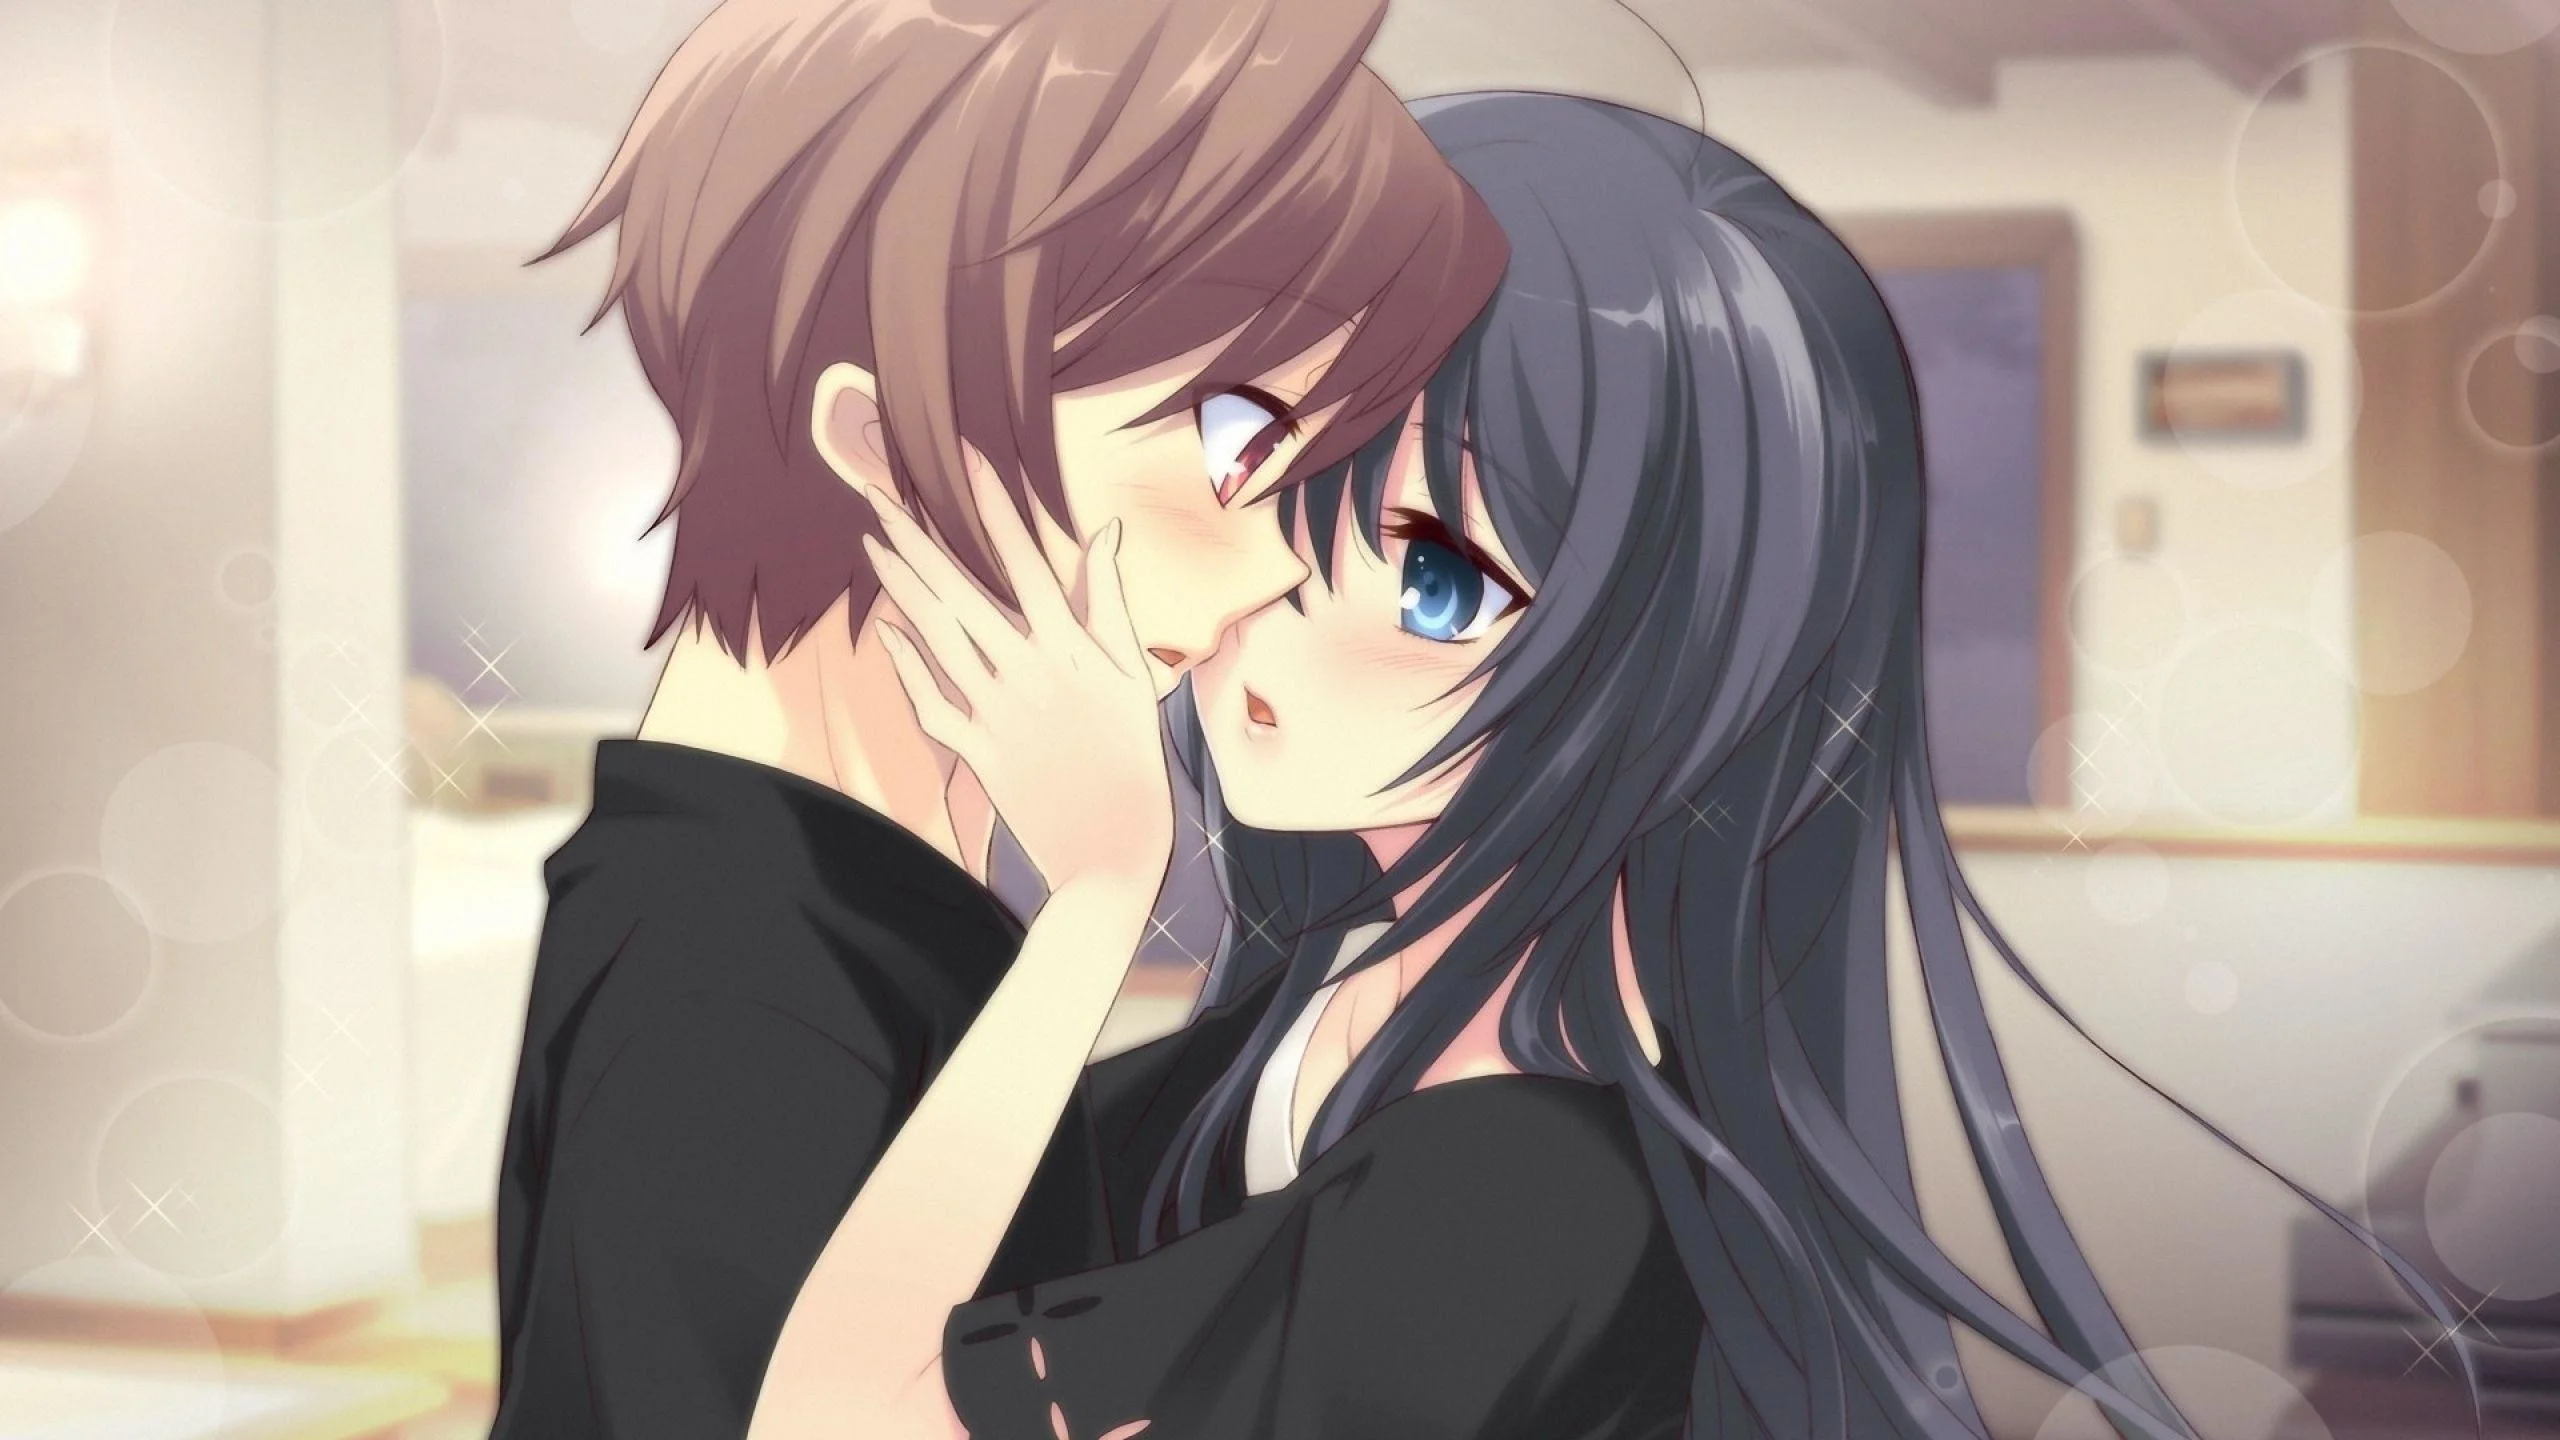 Cute Anime Couple Wallpaper Download Wallpapers